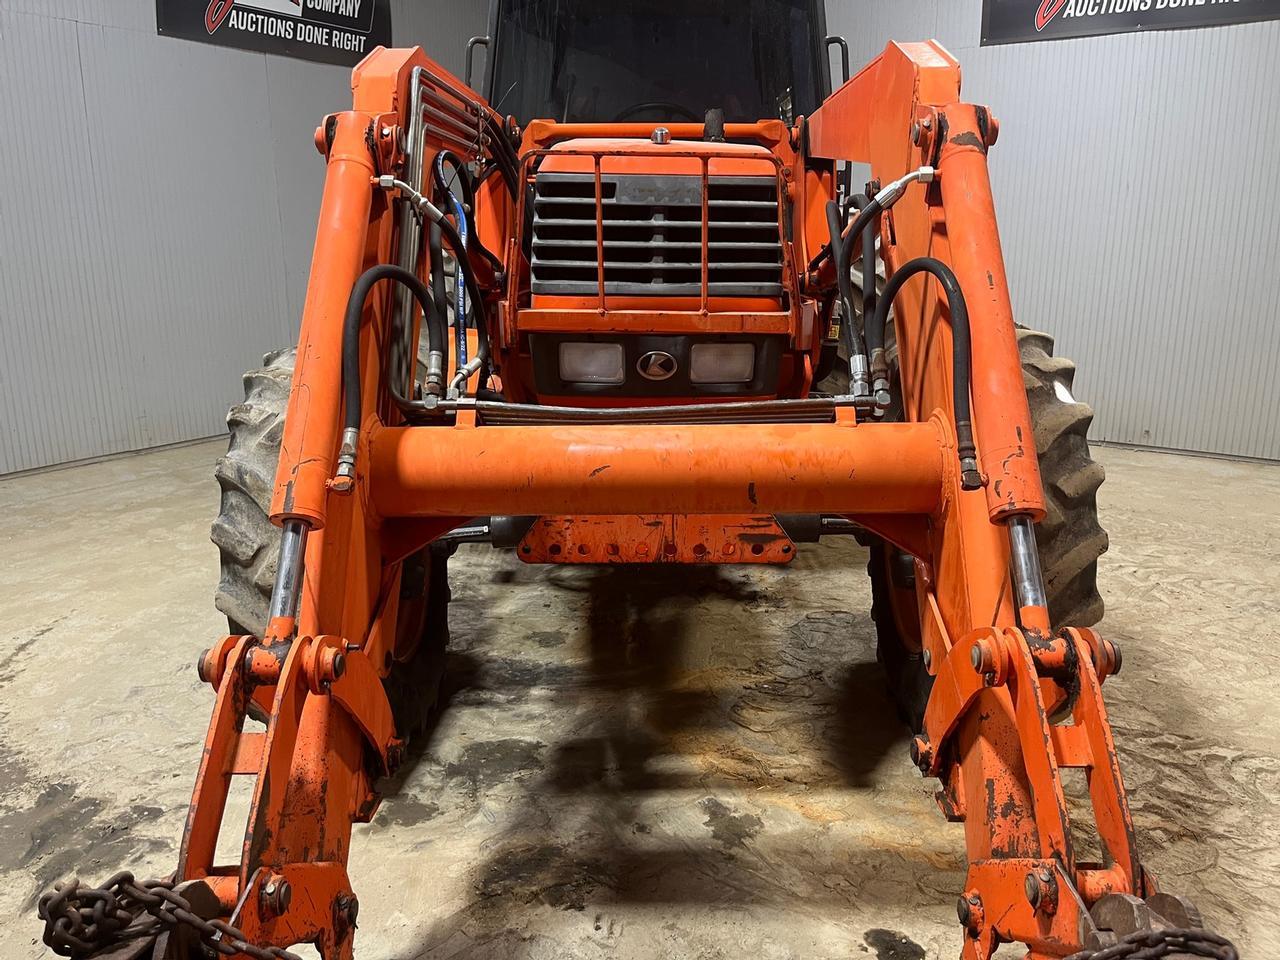 Kubota M9000 Tractor with Loader